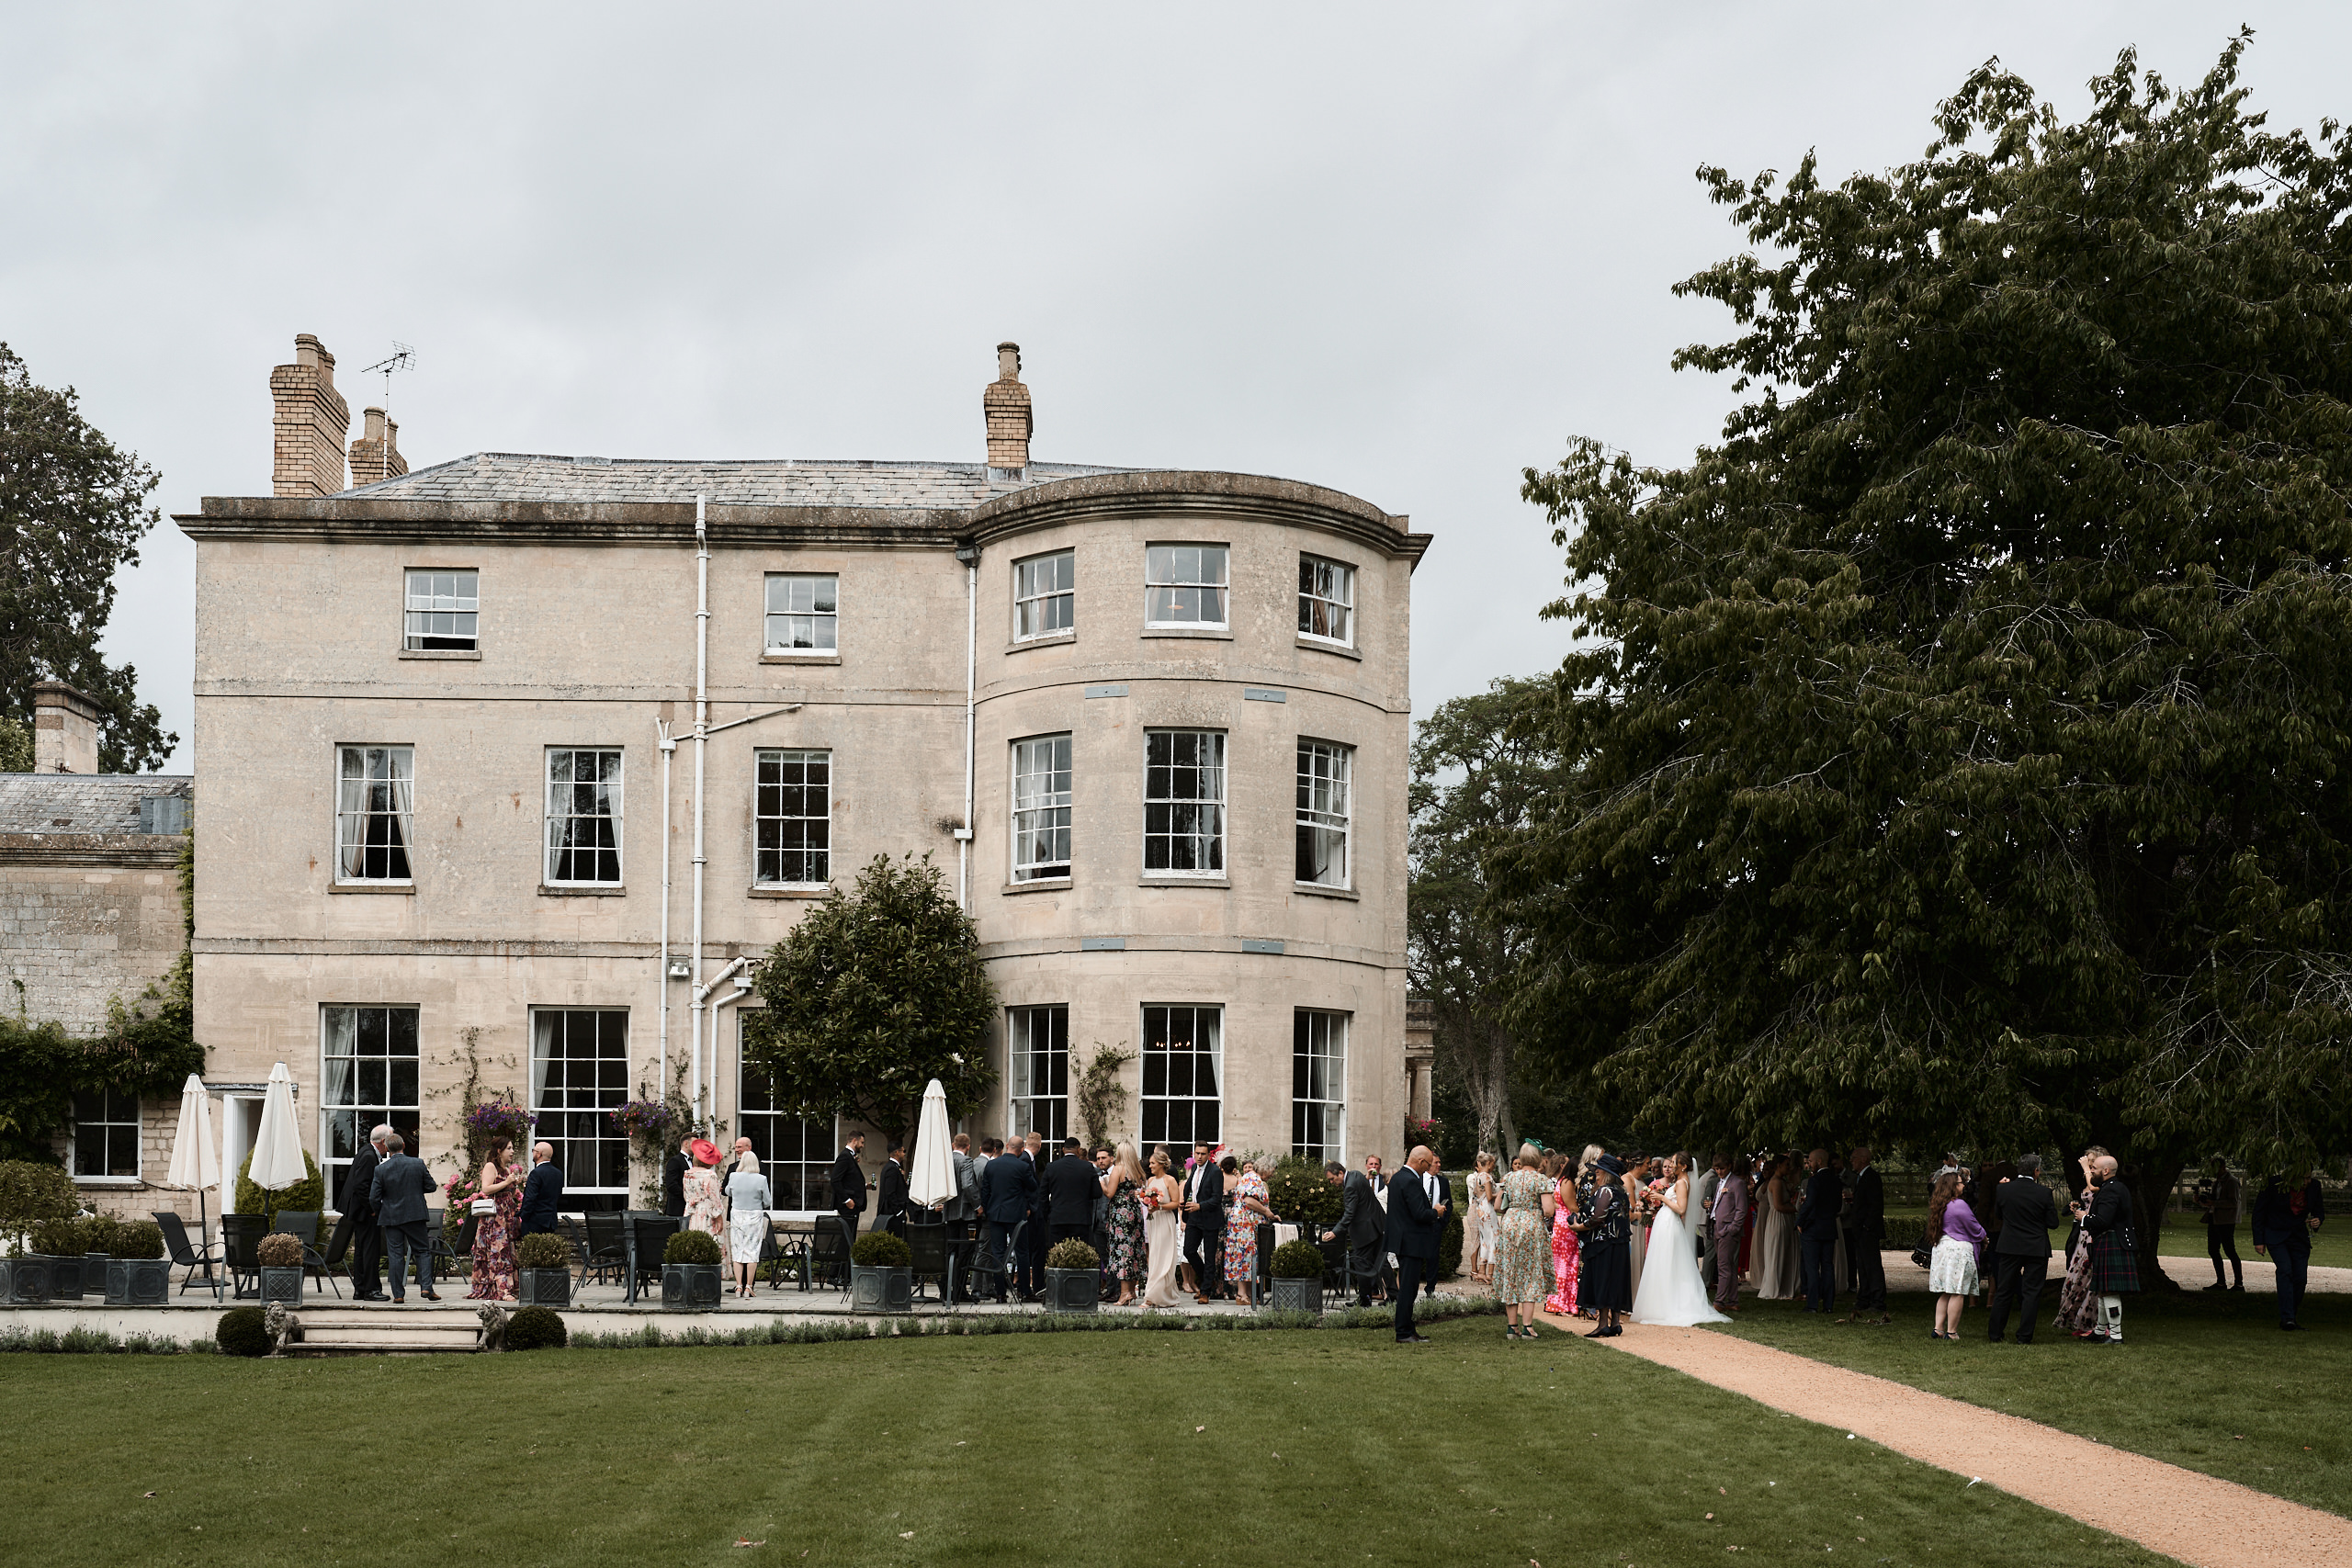 A wedding party standing in front of a large mansion.